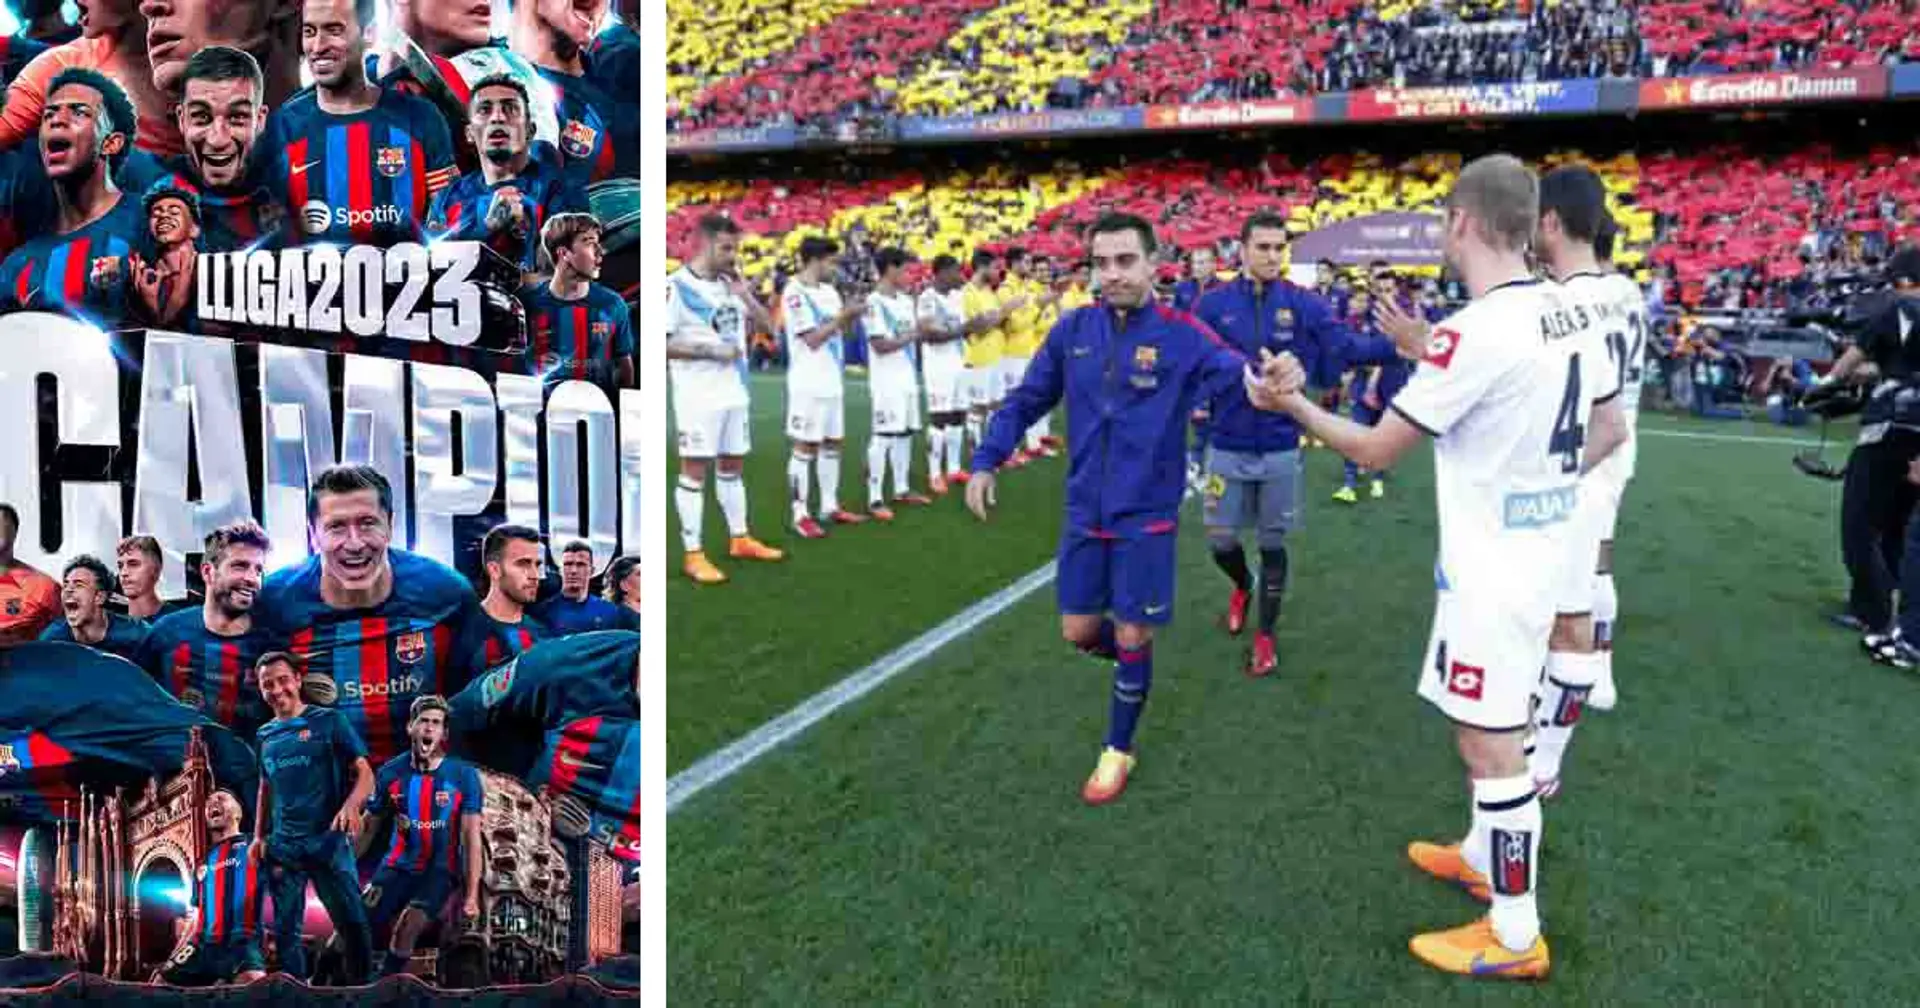 Will Barcelona receive guard of honour from Real Sociedad? Answered